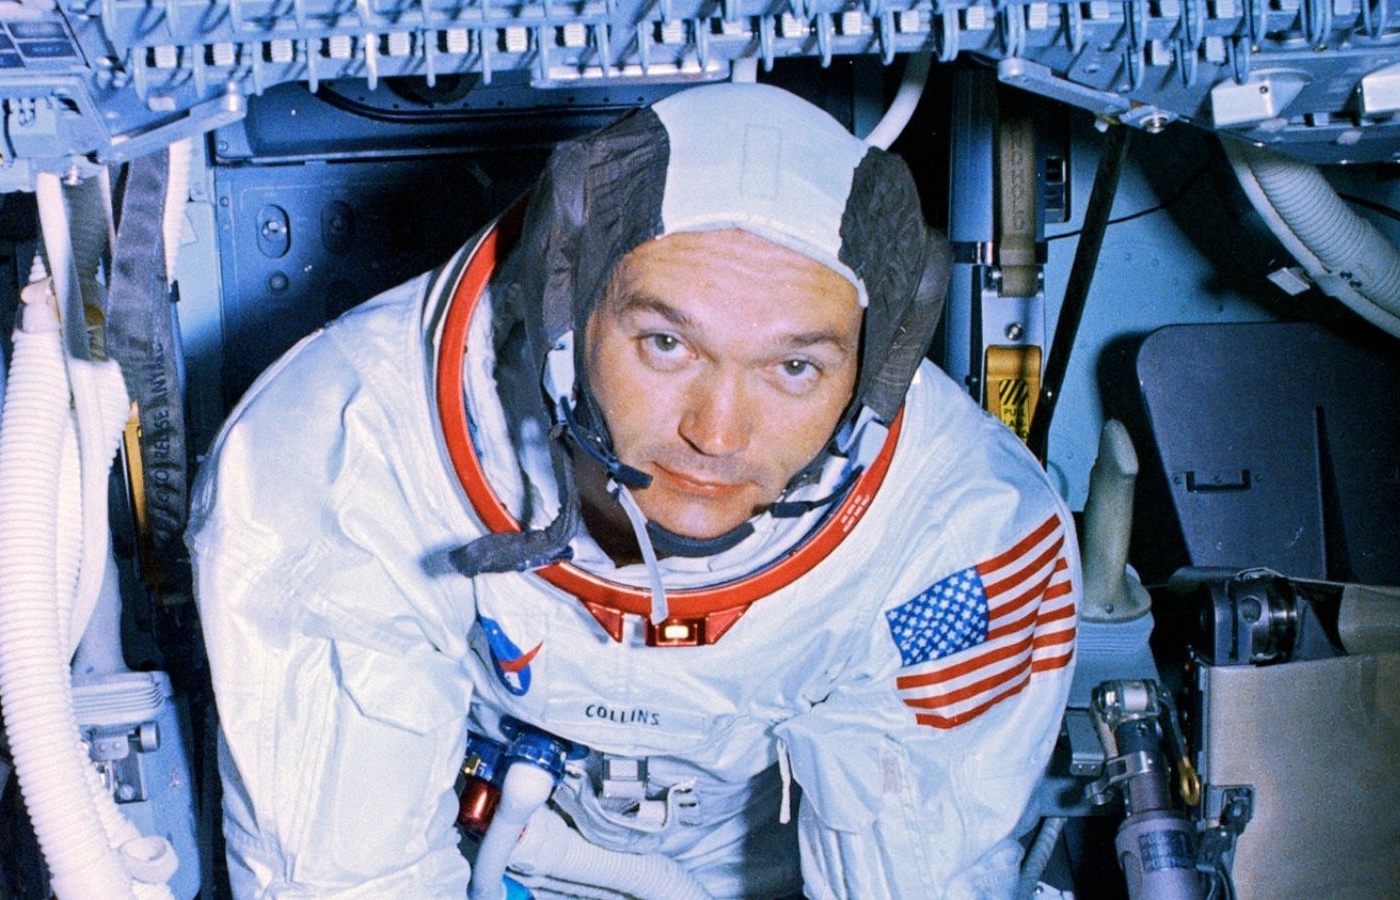 Who is Michael Collins: Biography, Astronauts Career and Legacy